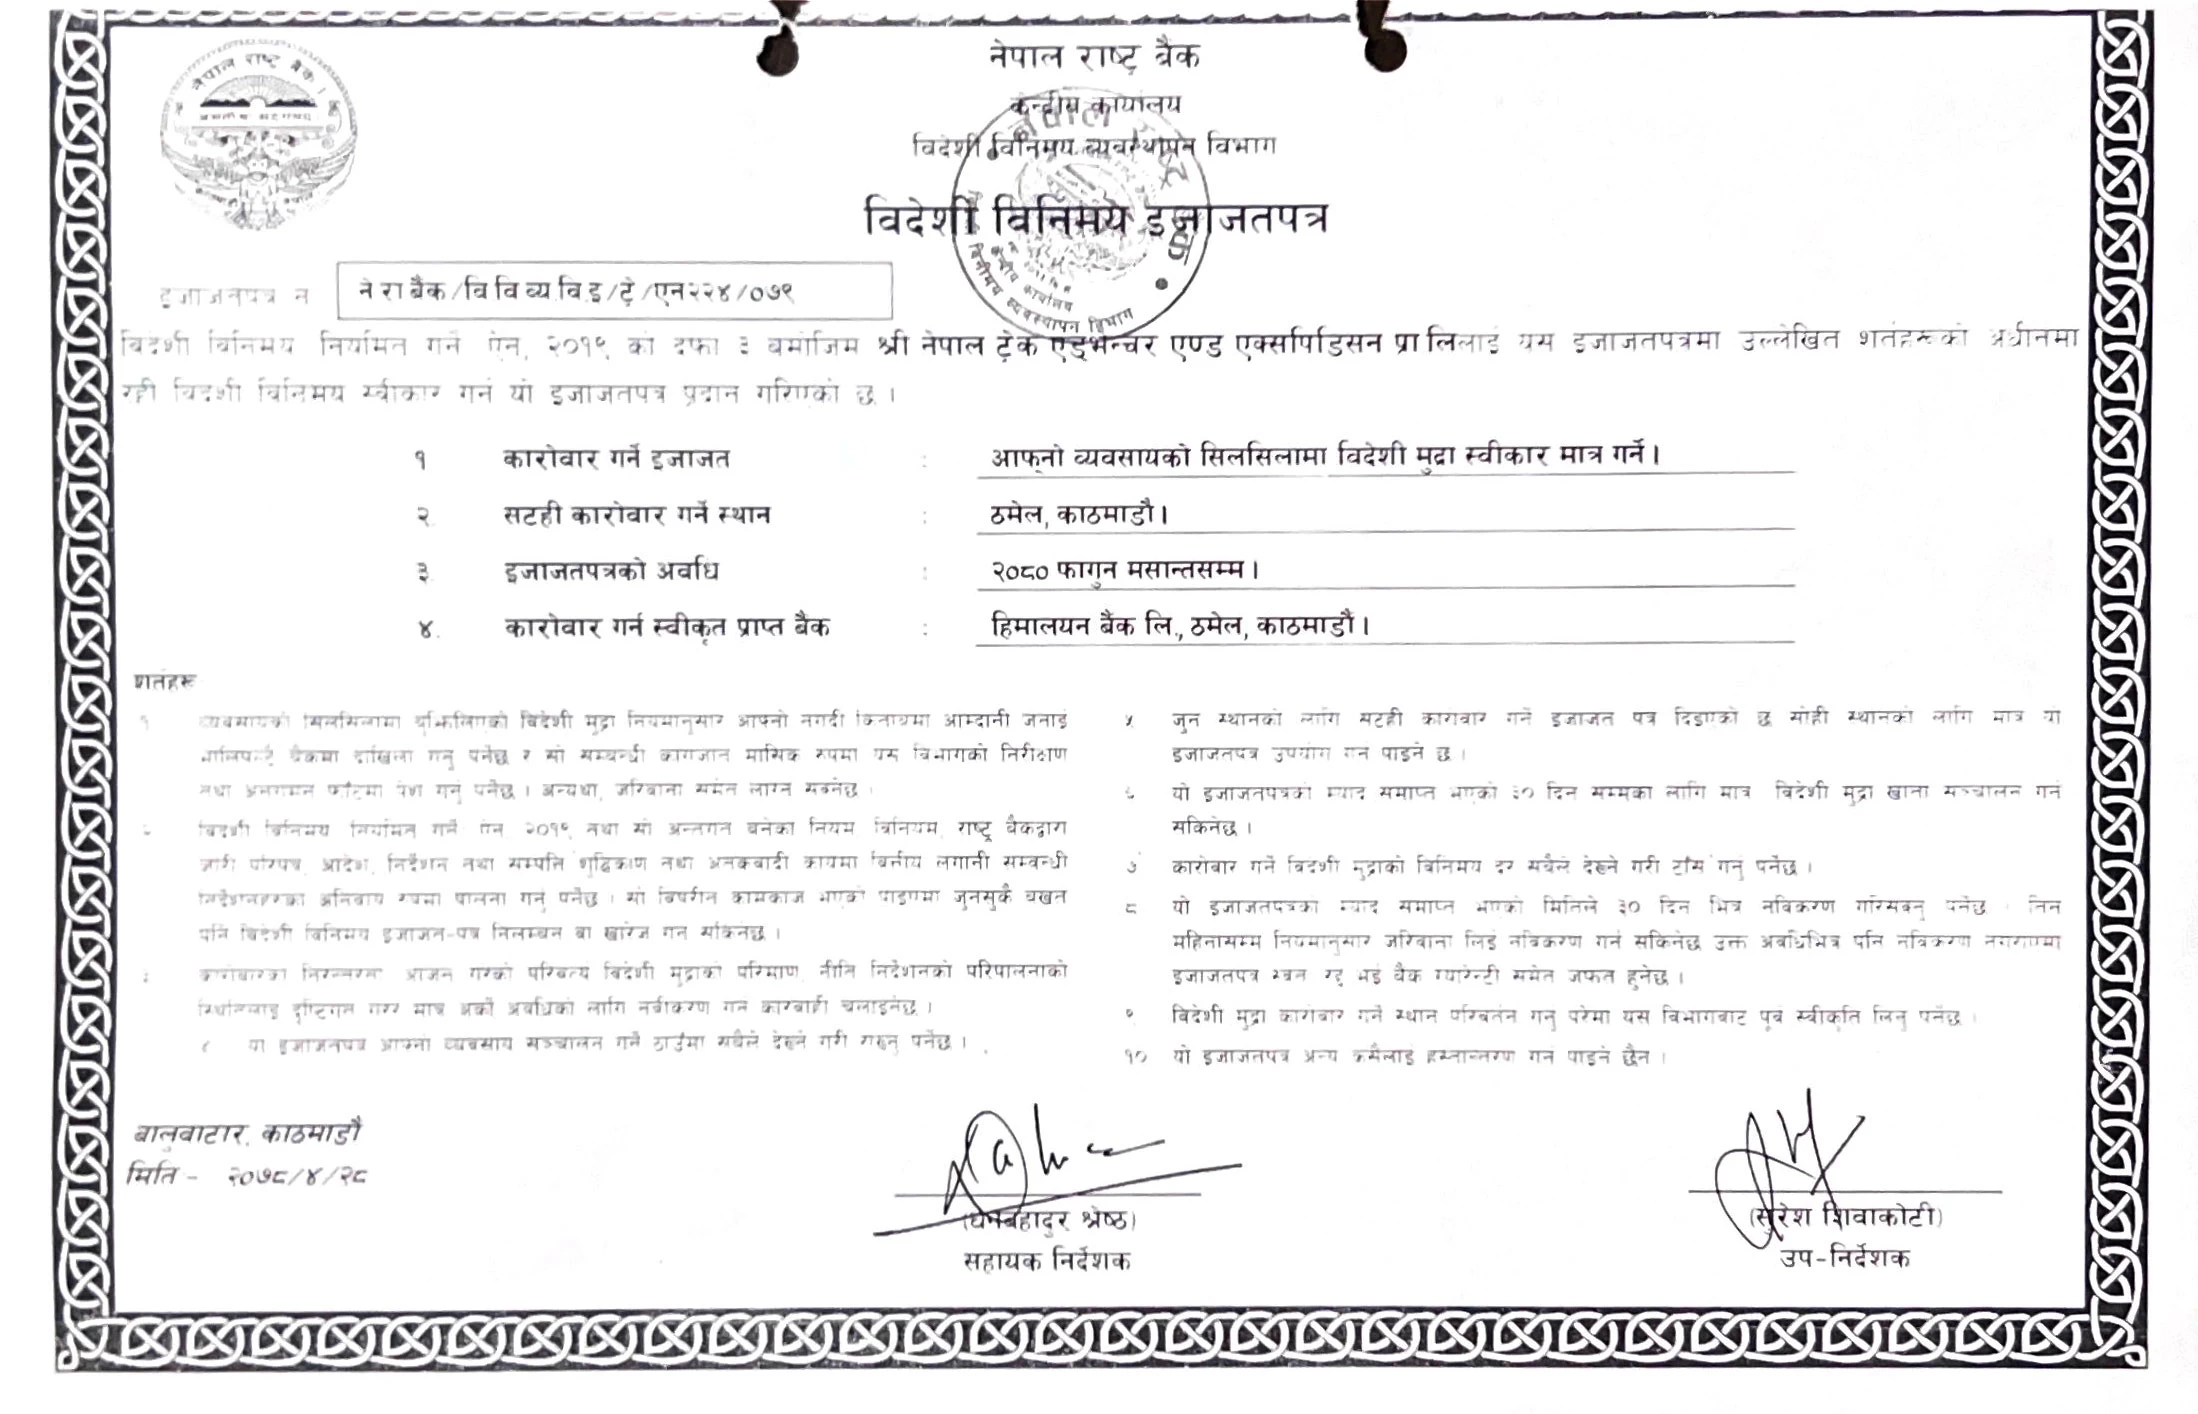 Nepal Rastra Bank - Foreign Exchange Approval Letter